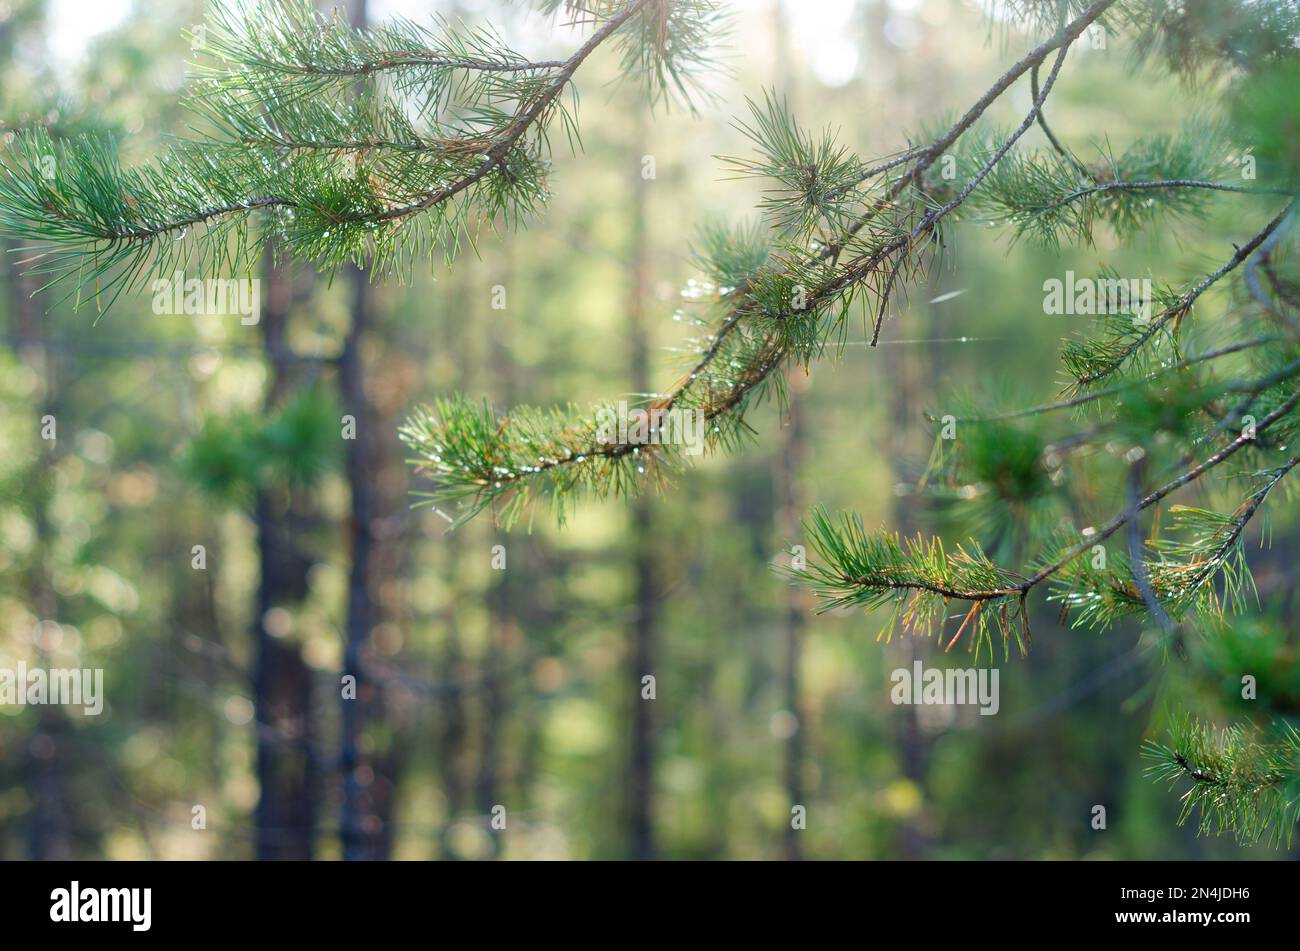 Thin branches of spruce grow against the rising sun in the wild Northern forest. Stock Photo